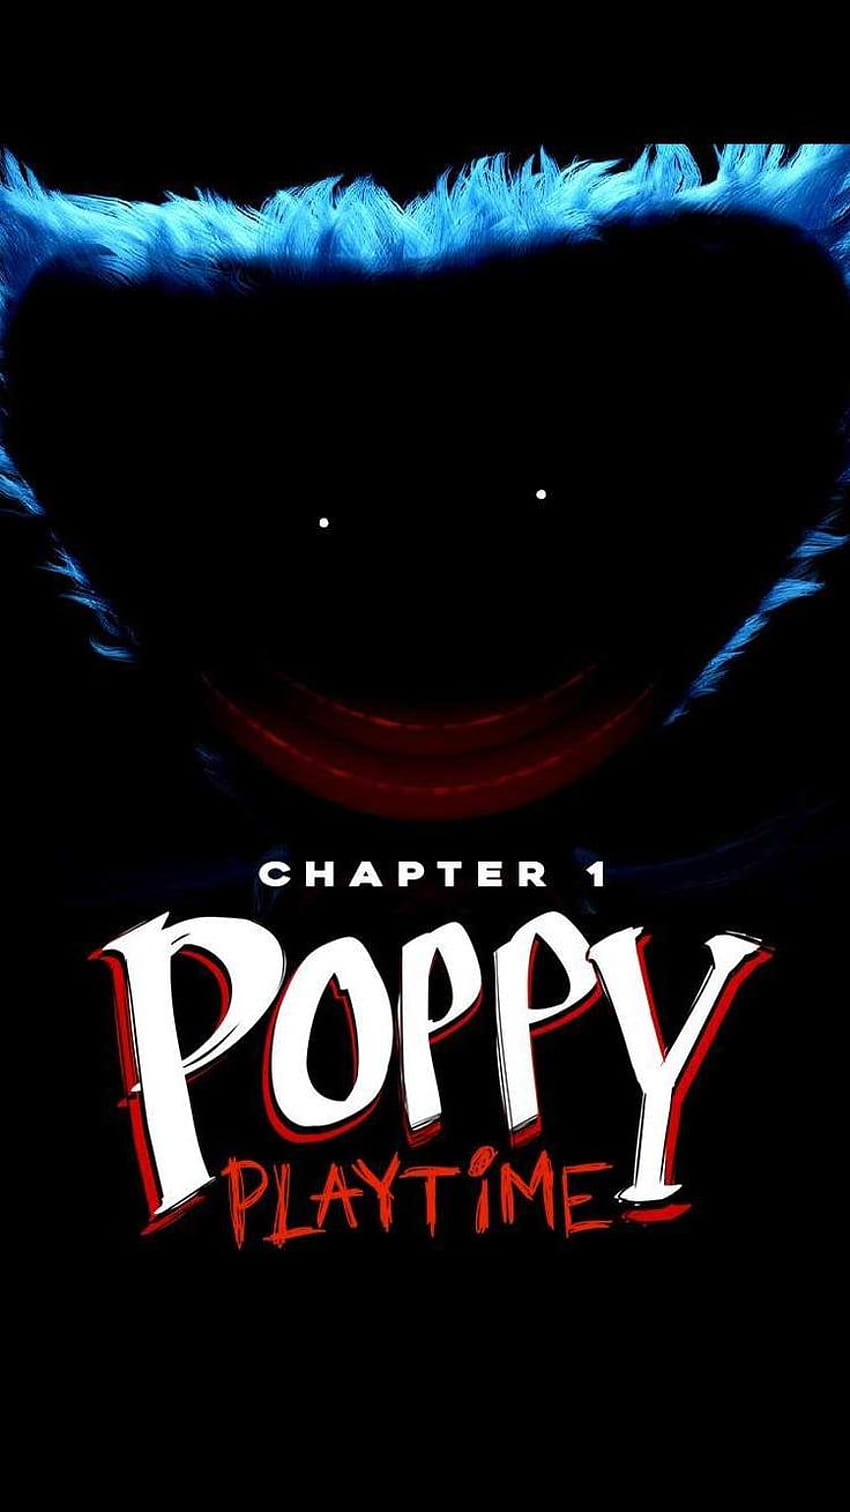 Poppy Playtime ポスター Discover more Game, Horror Game, Huggy Wuggy, Hugy Wugy, Poppy Playtime wallp… HD電話の壁紙